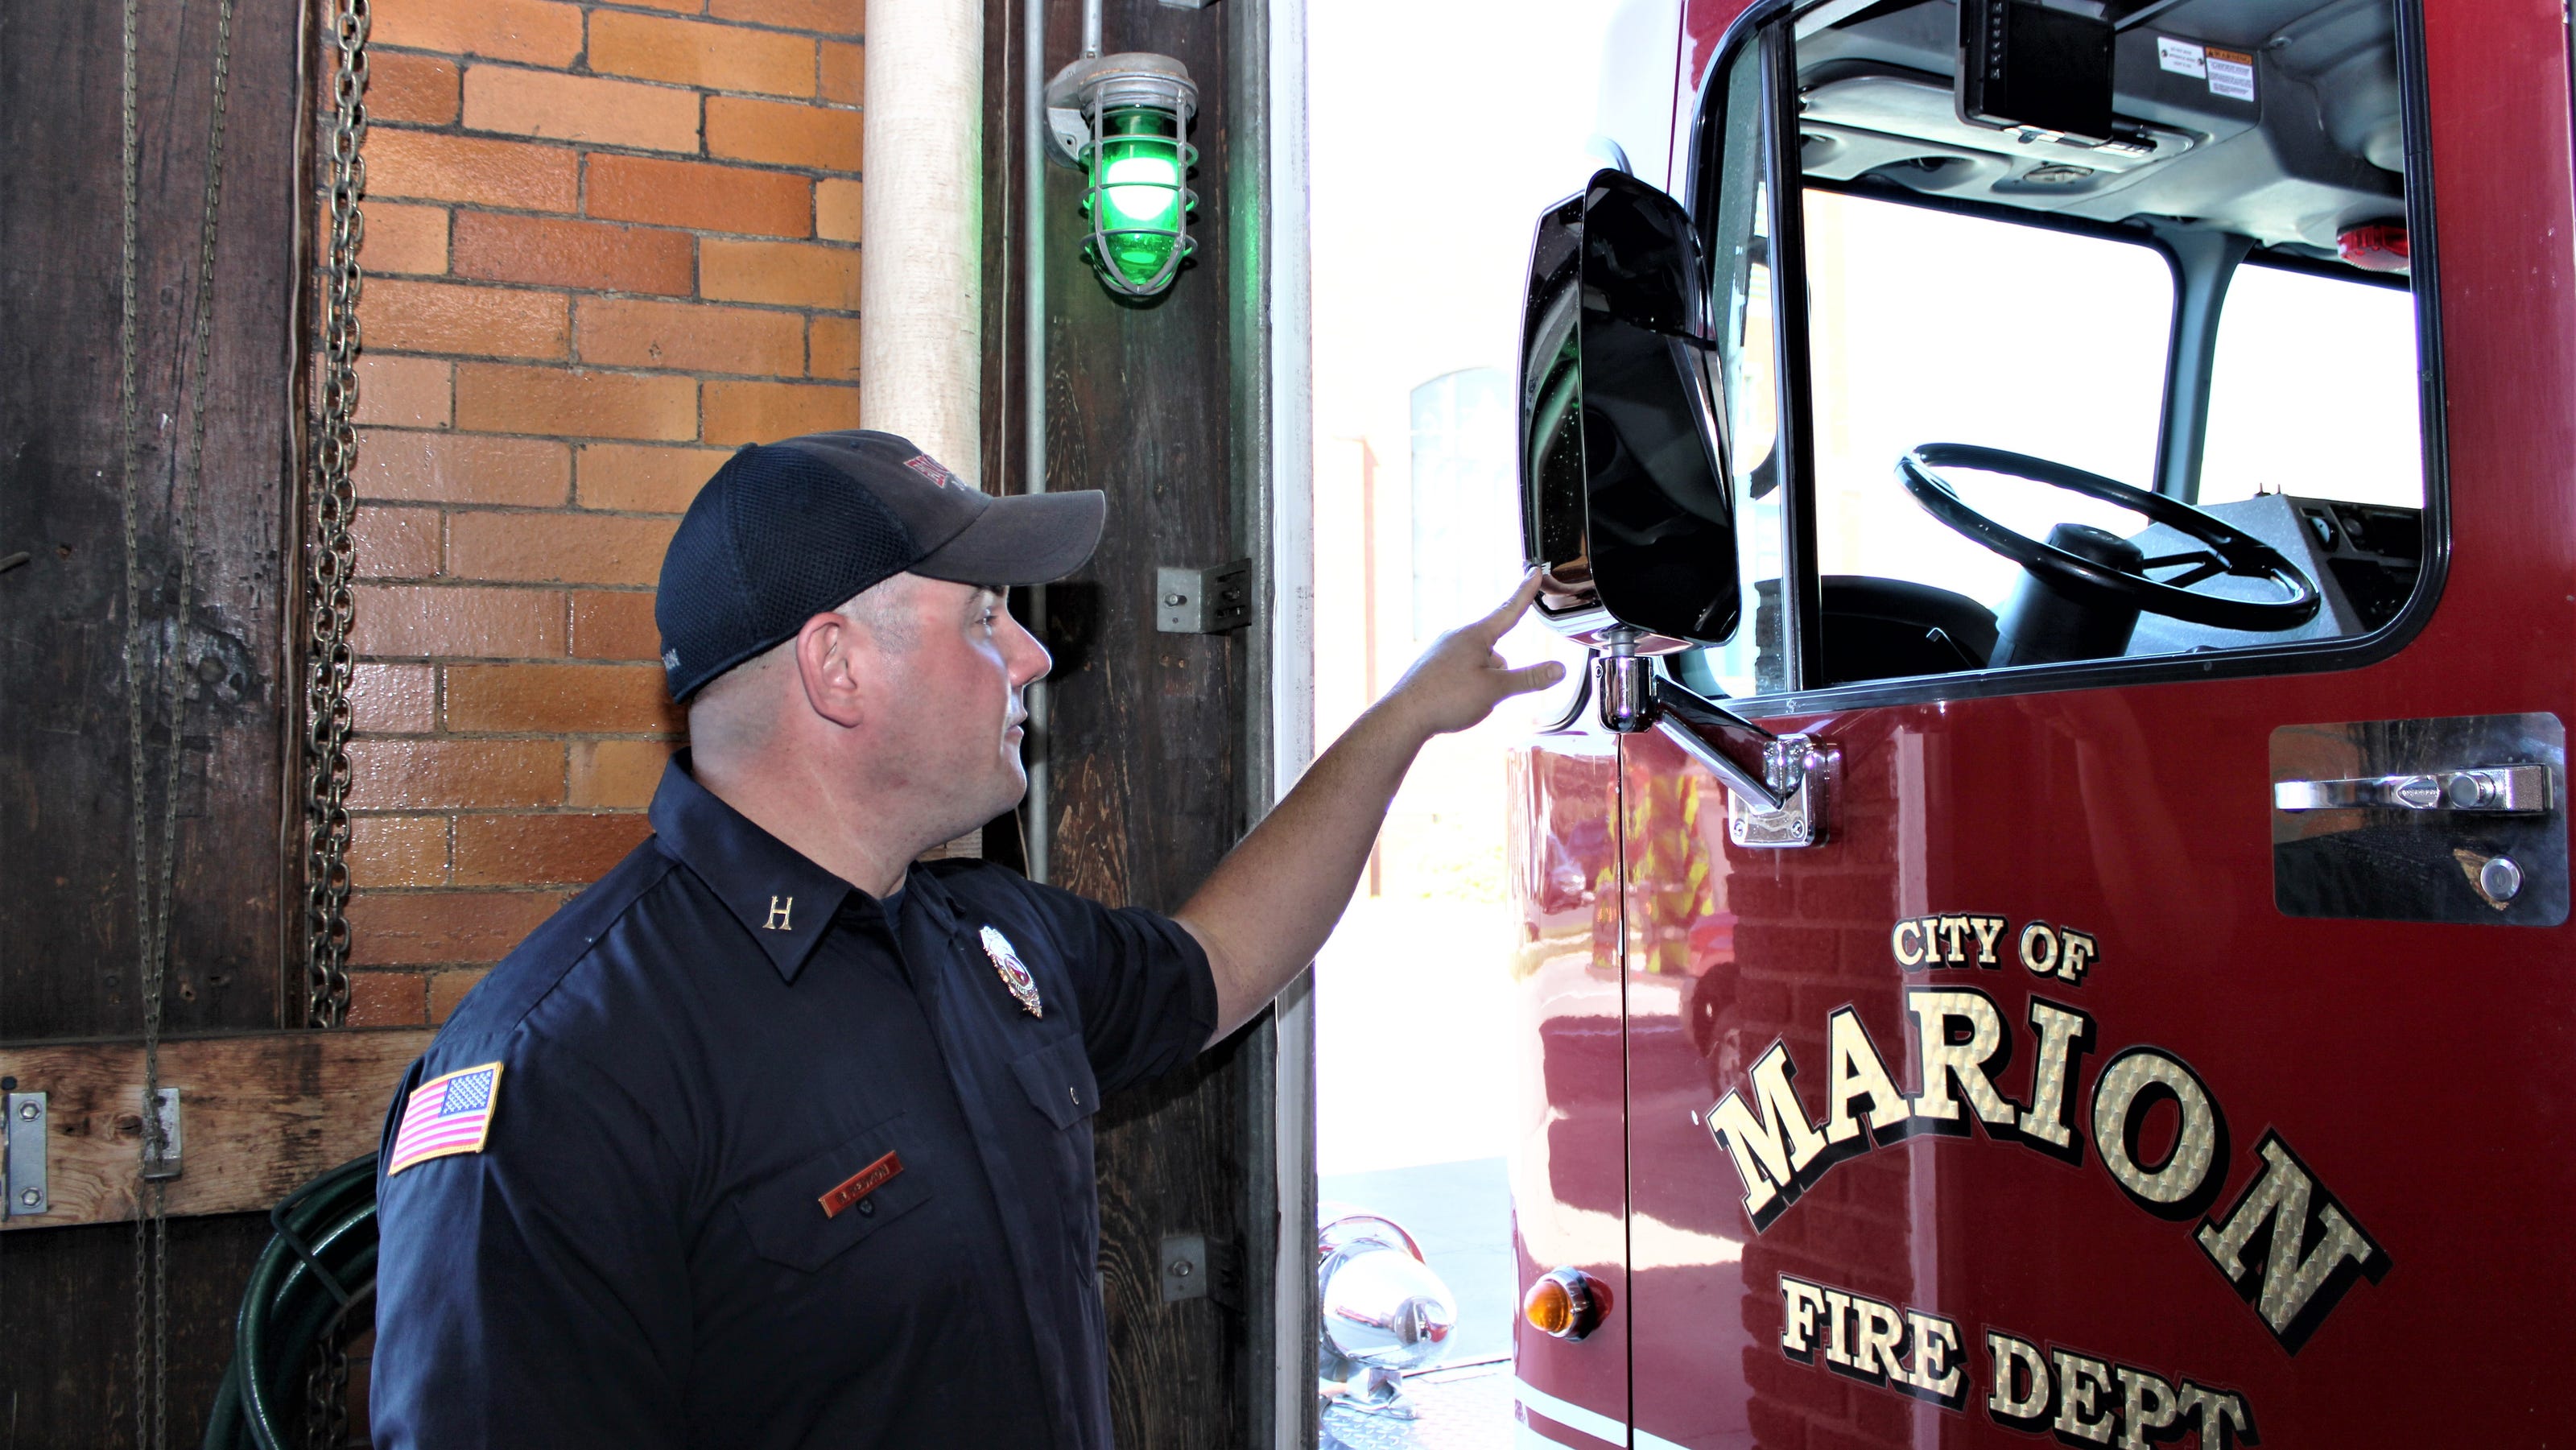 Marion Fire Dept. seeks levy to fund new building, vehicles, equipment